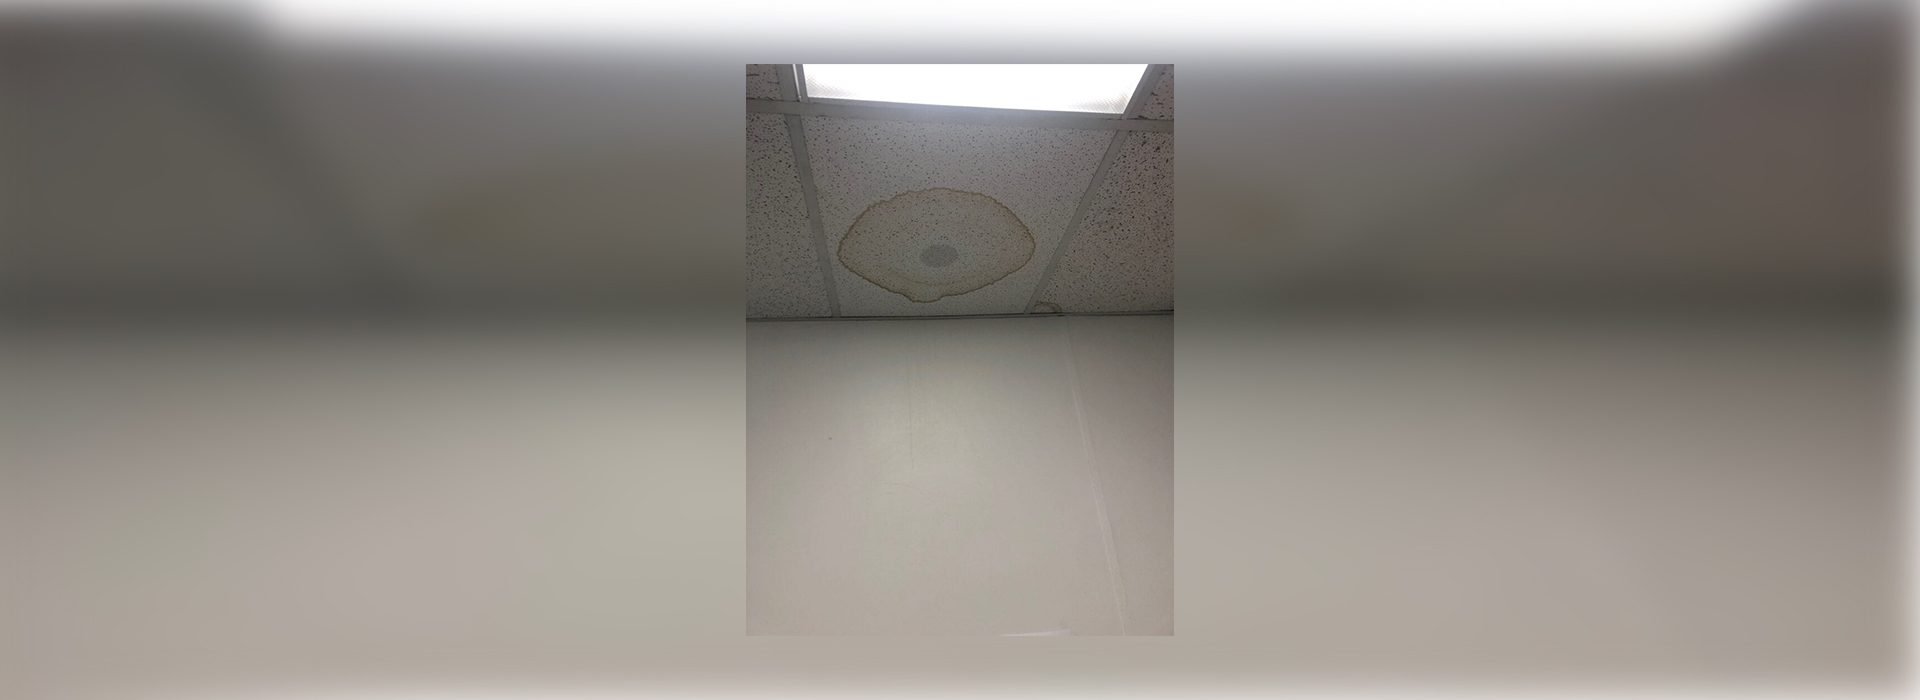 A ceiling light is shown in the middle of a room.